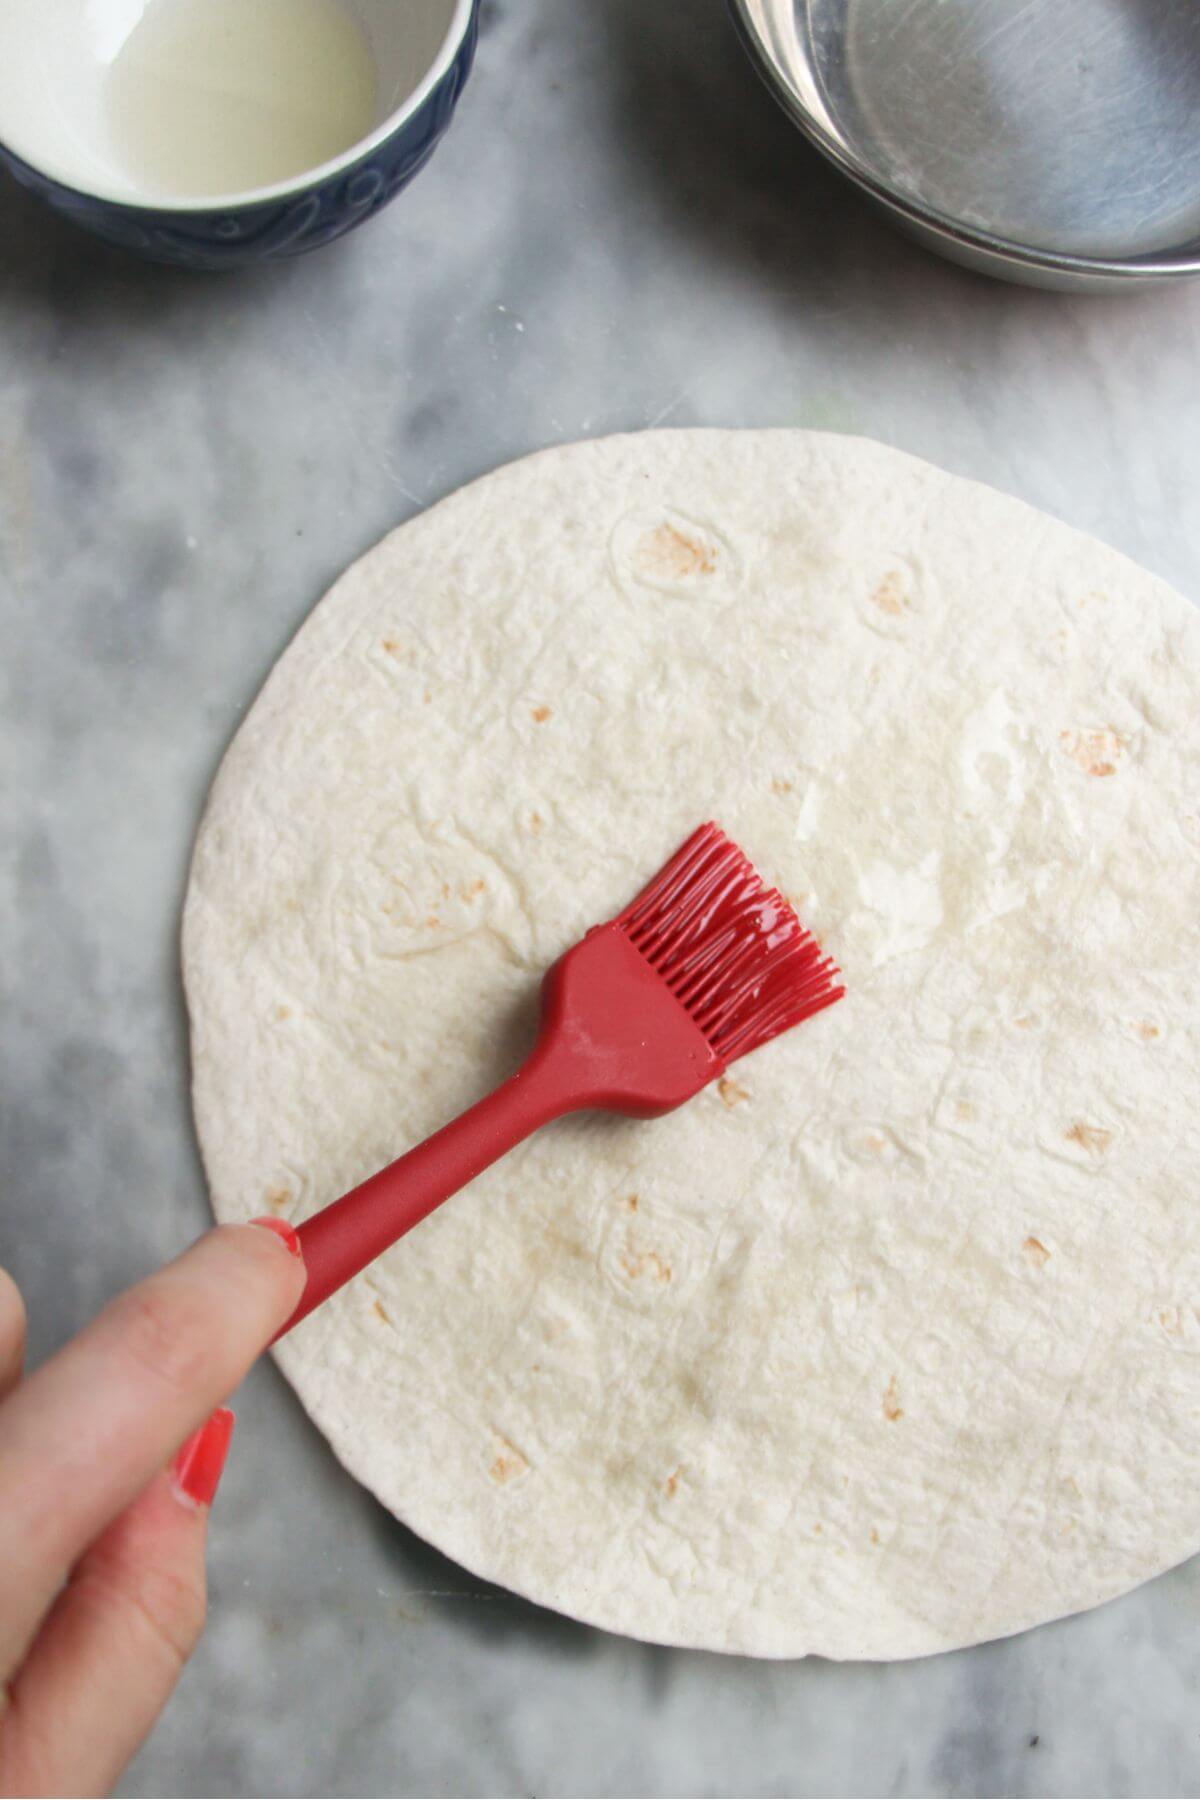 Small red brush brushing oil onto a large flour tortilla.